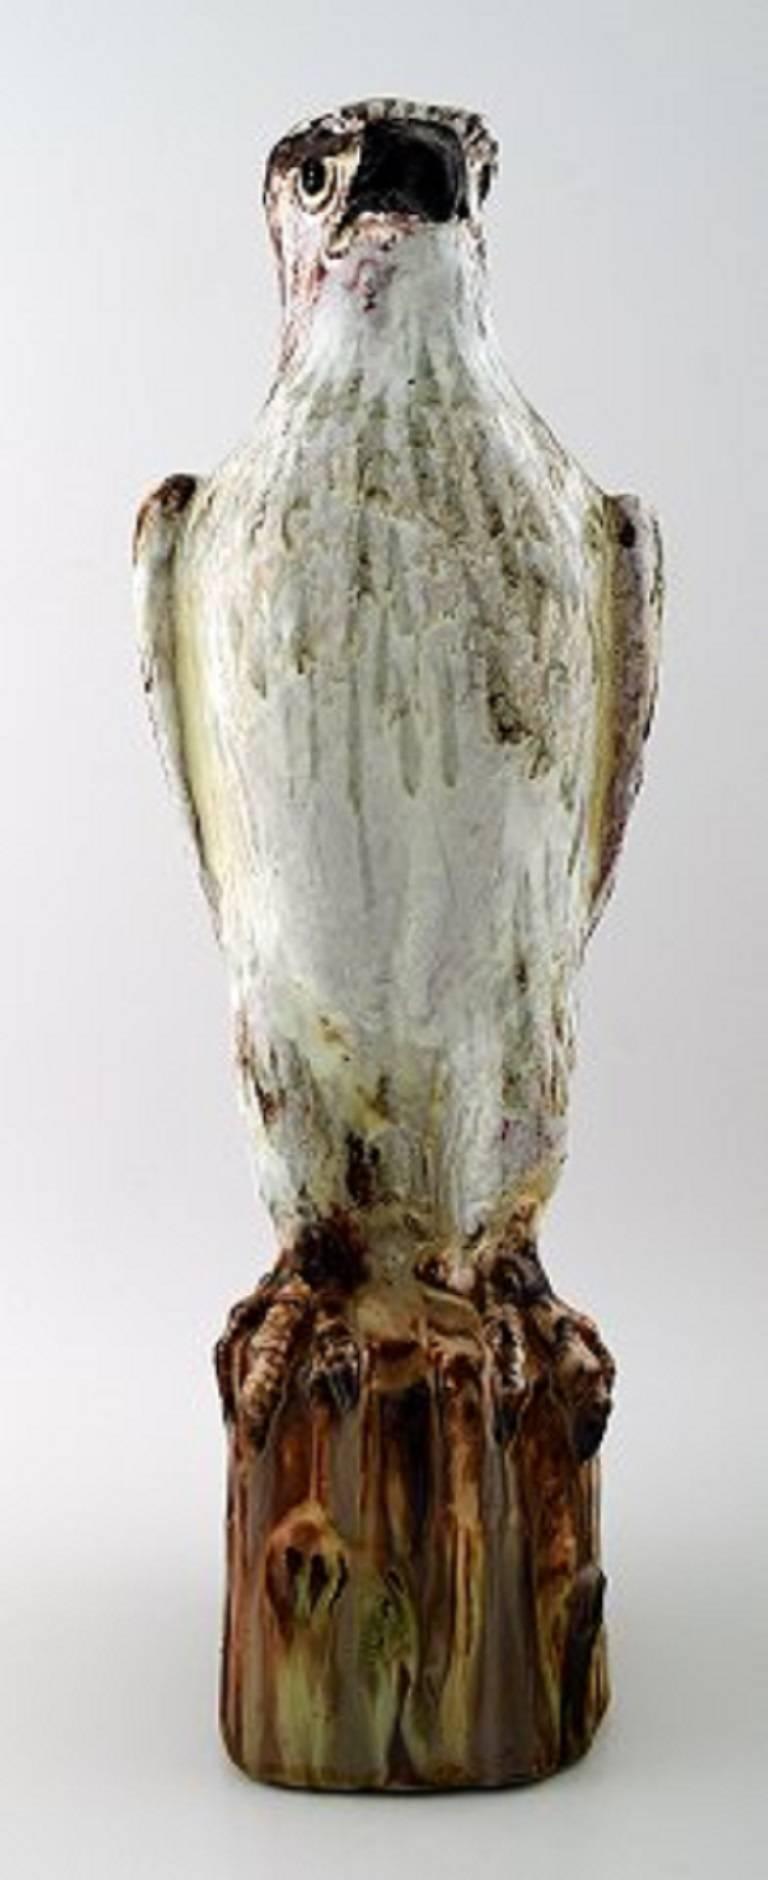 Gudmundur Mar Einarsson b. Middal 1895 d. 1963:

Icelandic falcon of art pottery decorated with gray, green, brown and white glaze.

Signed in monogram GE, Iceland, 1940 ?.

Measures: 42 cm x 12.5 cm.

In perfect condition.